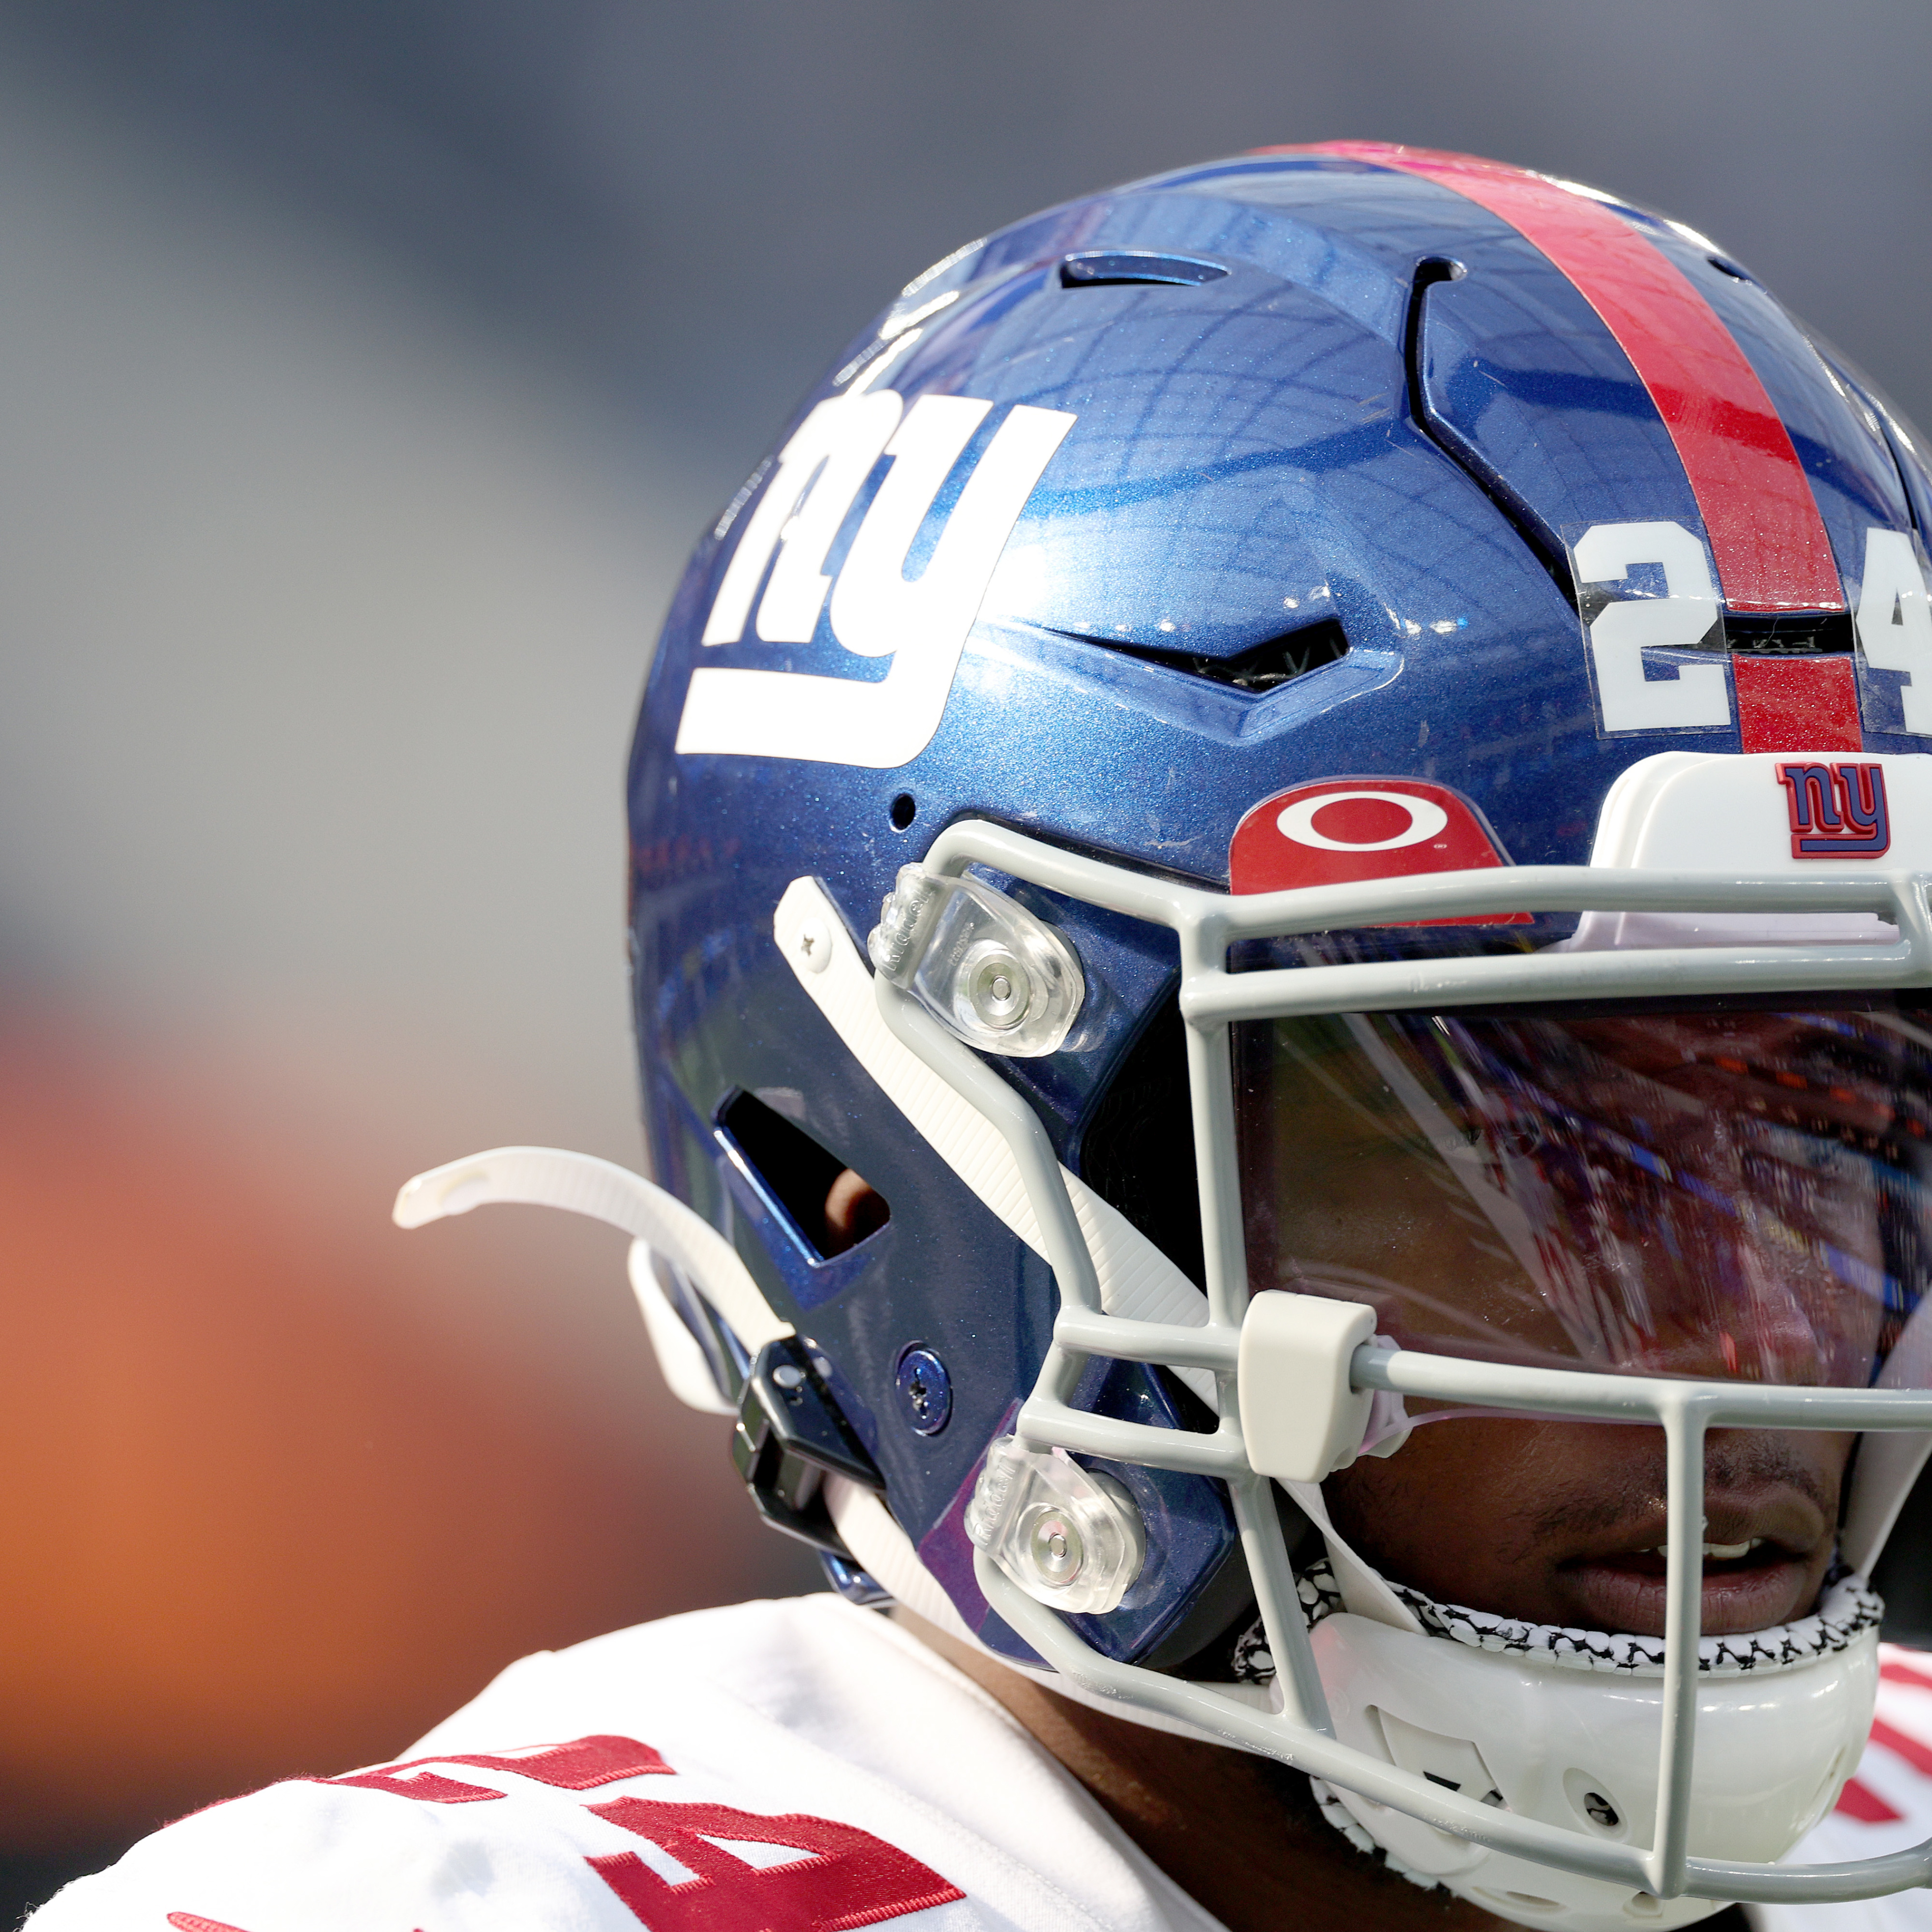 James Bradberry Cut by Giants After Trade Rumors; Saves $10.1M in Cap Space